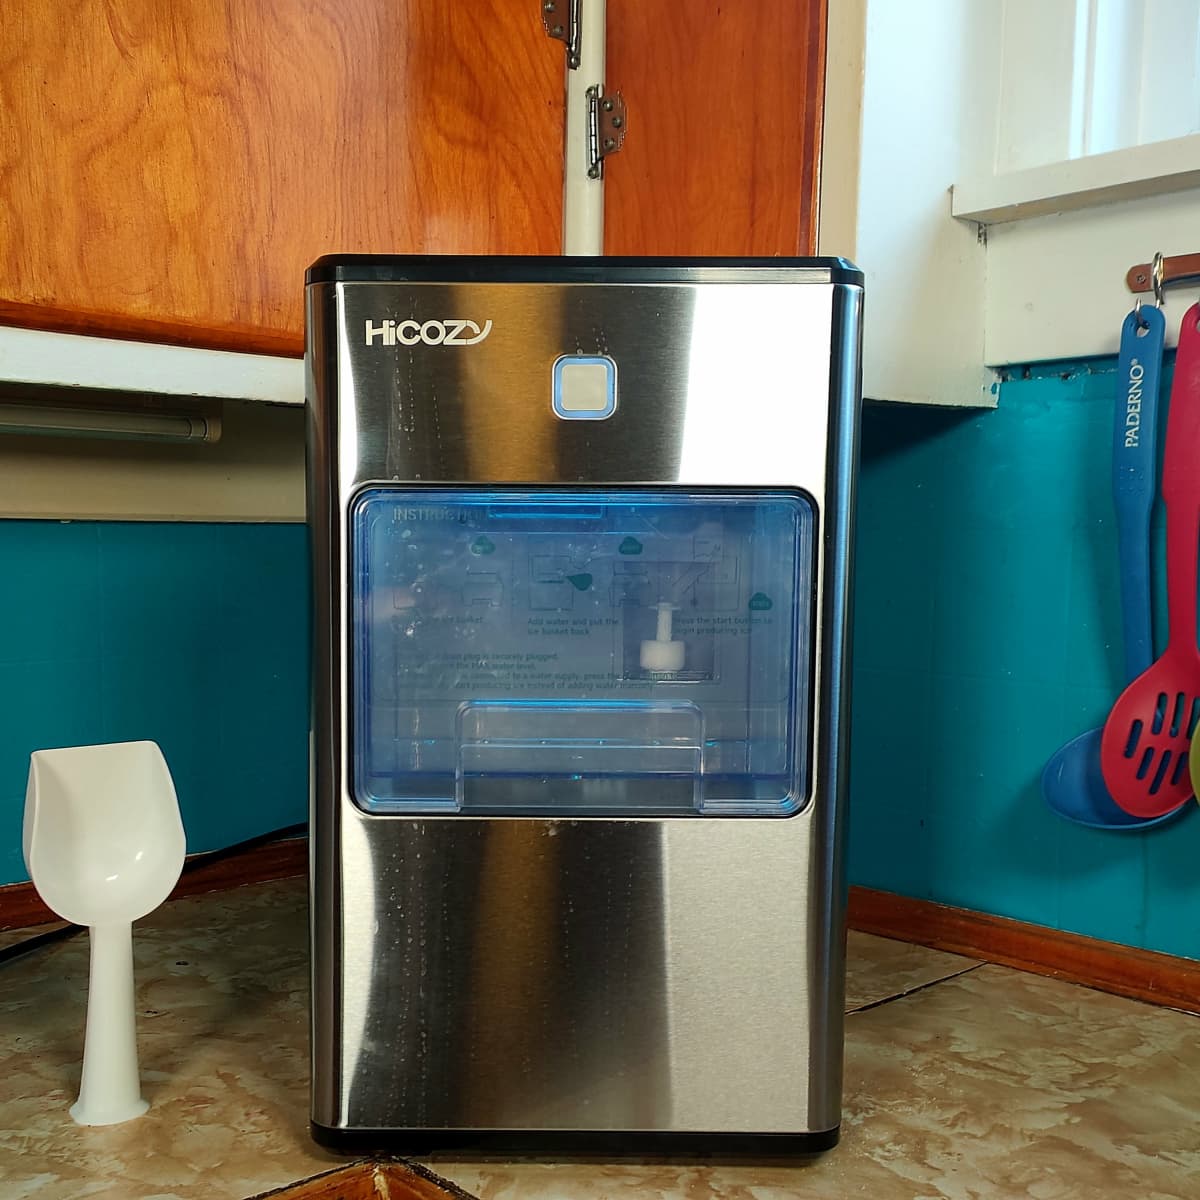 We are obsessed with our new @hicozy nugget ice maker! #nuggetice #nug